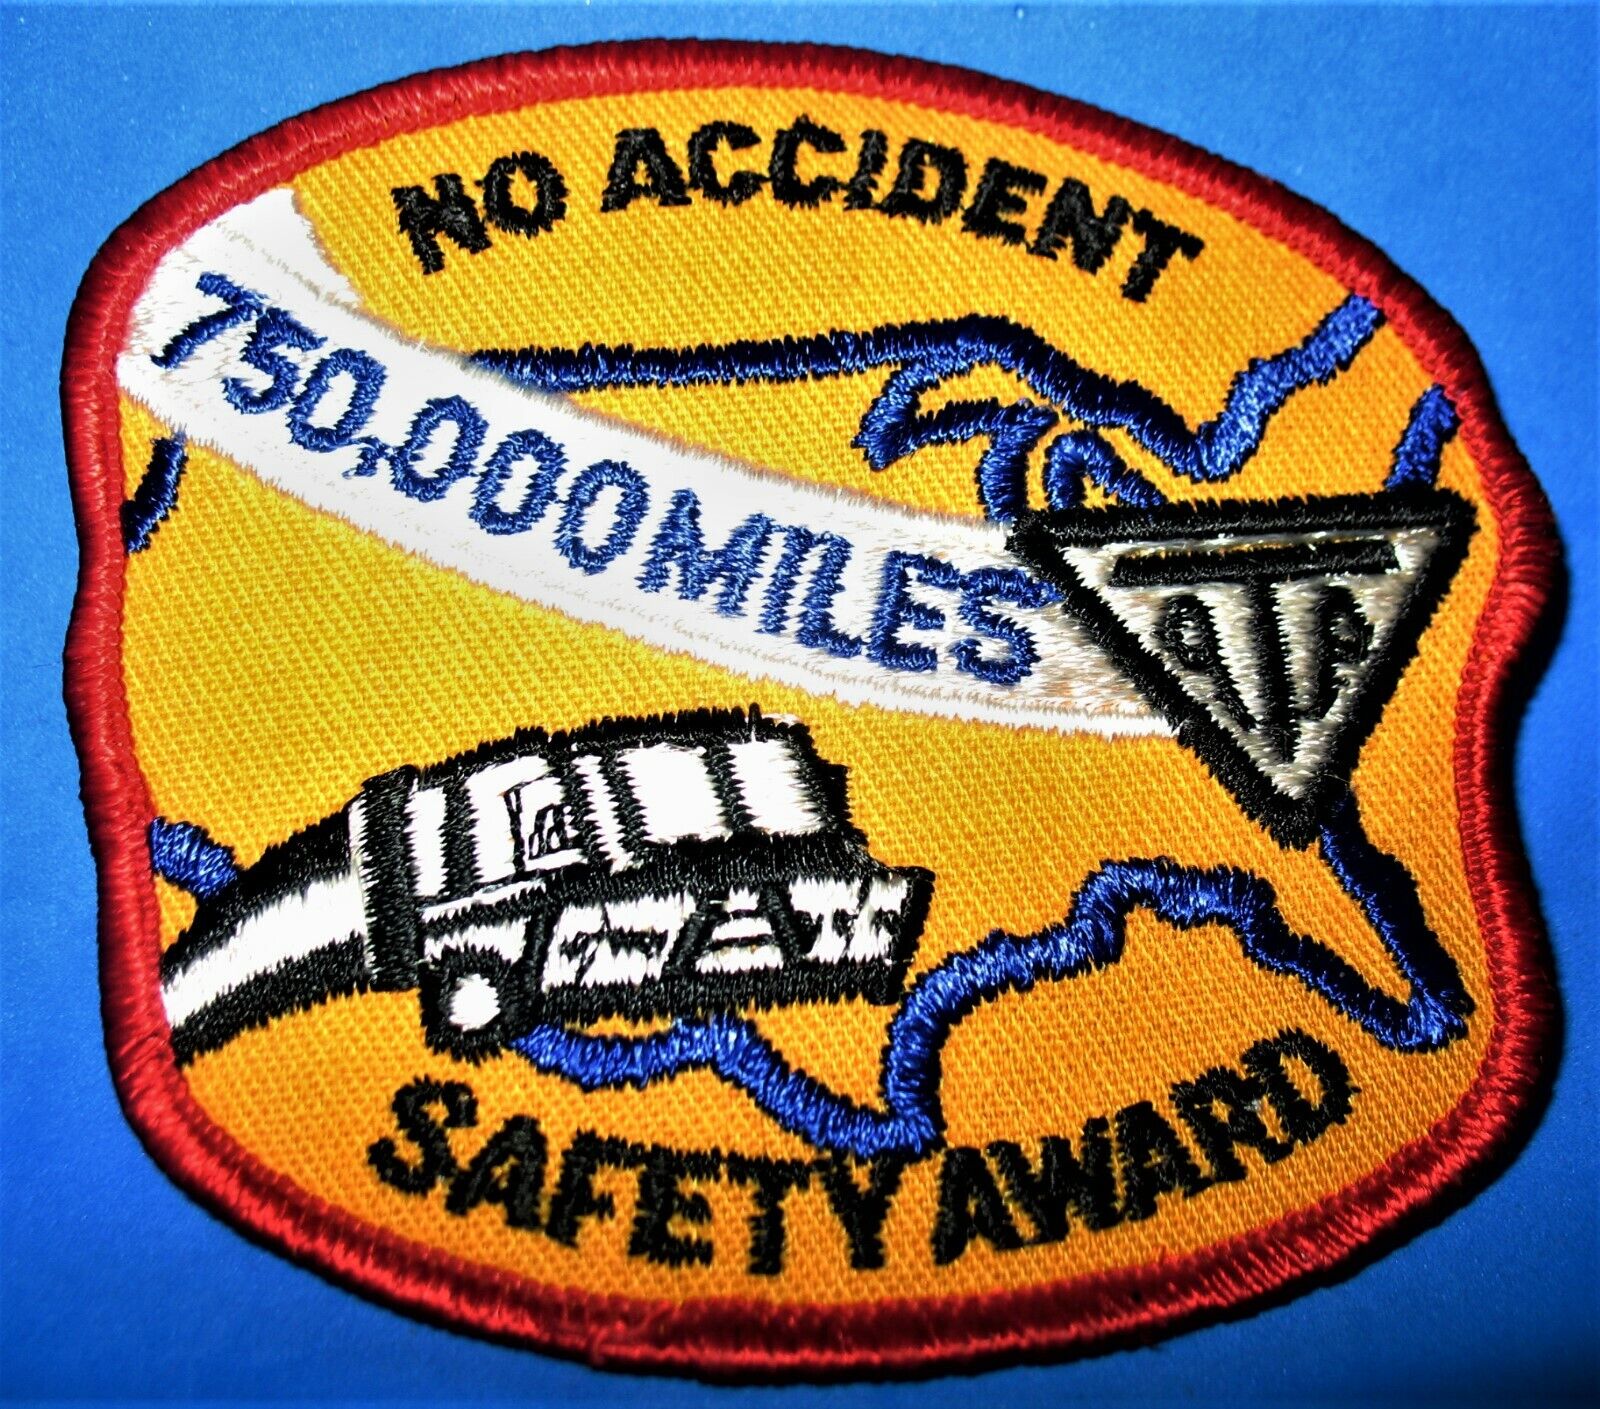 Vintage ATA Safety Award Patch 50,000 mile No Accident